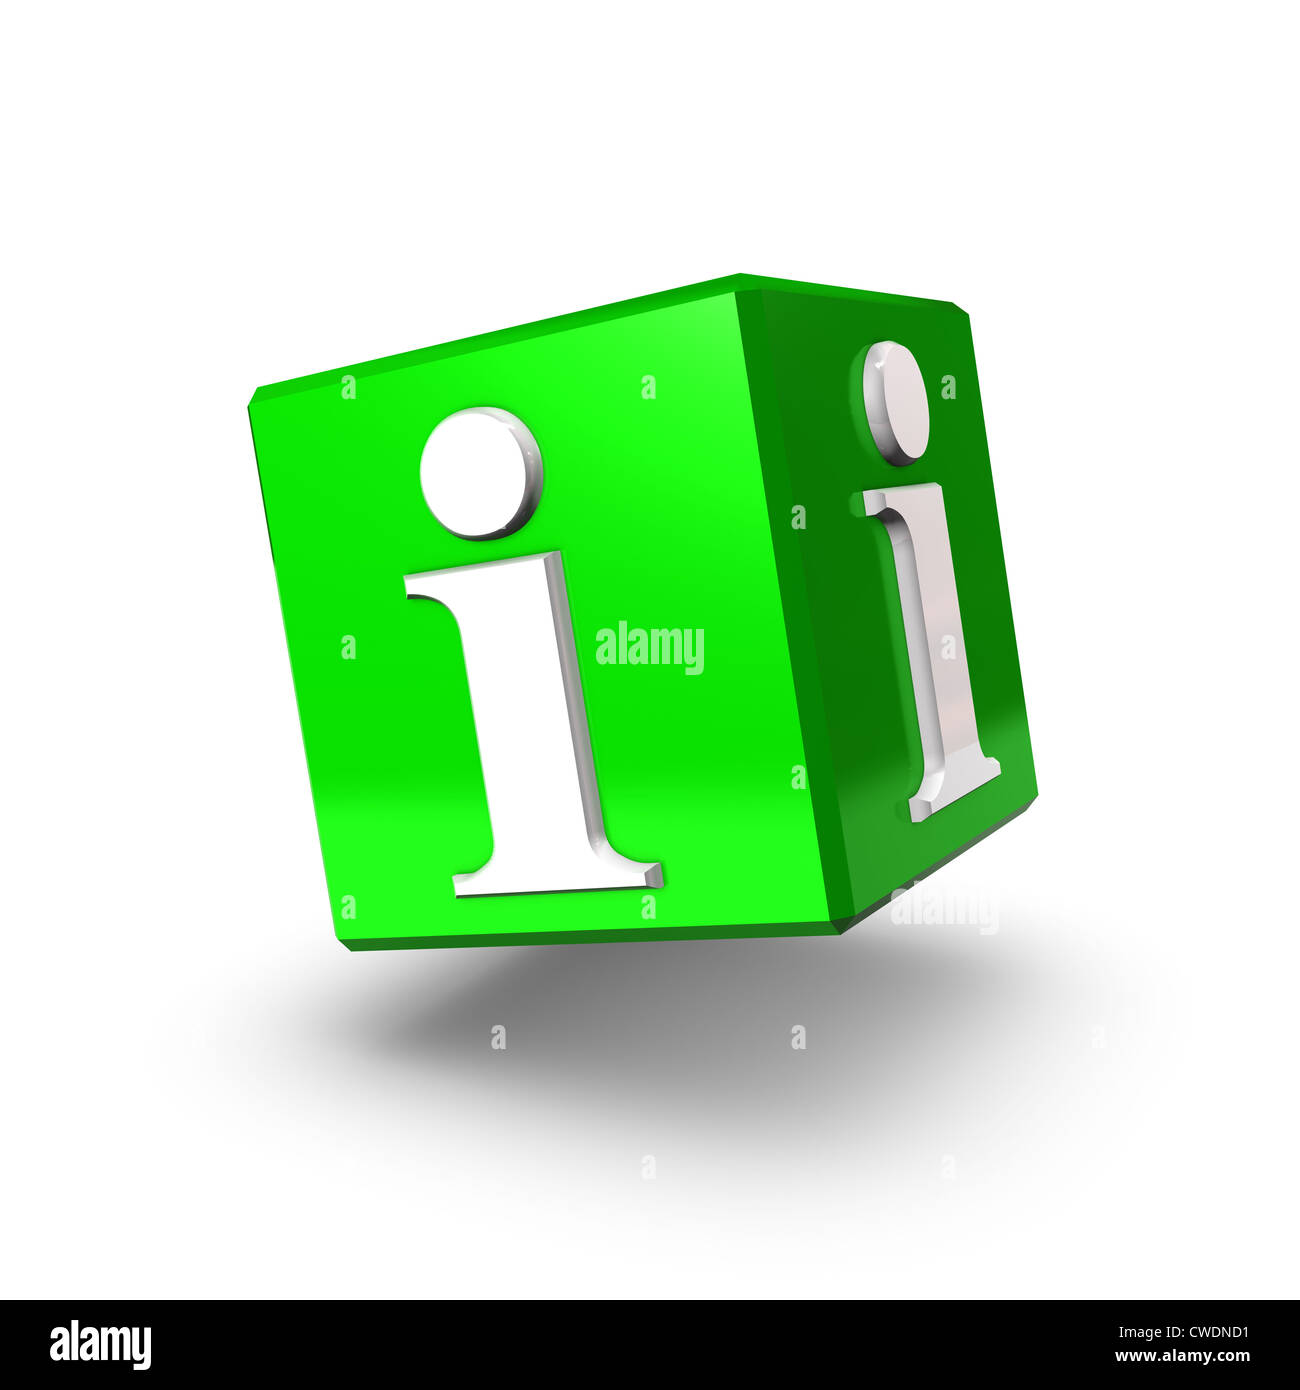 A green information box floating on a white background. Stock Photo